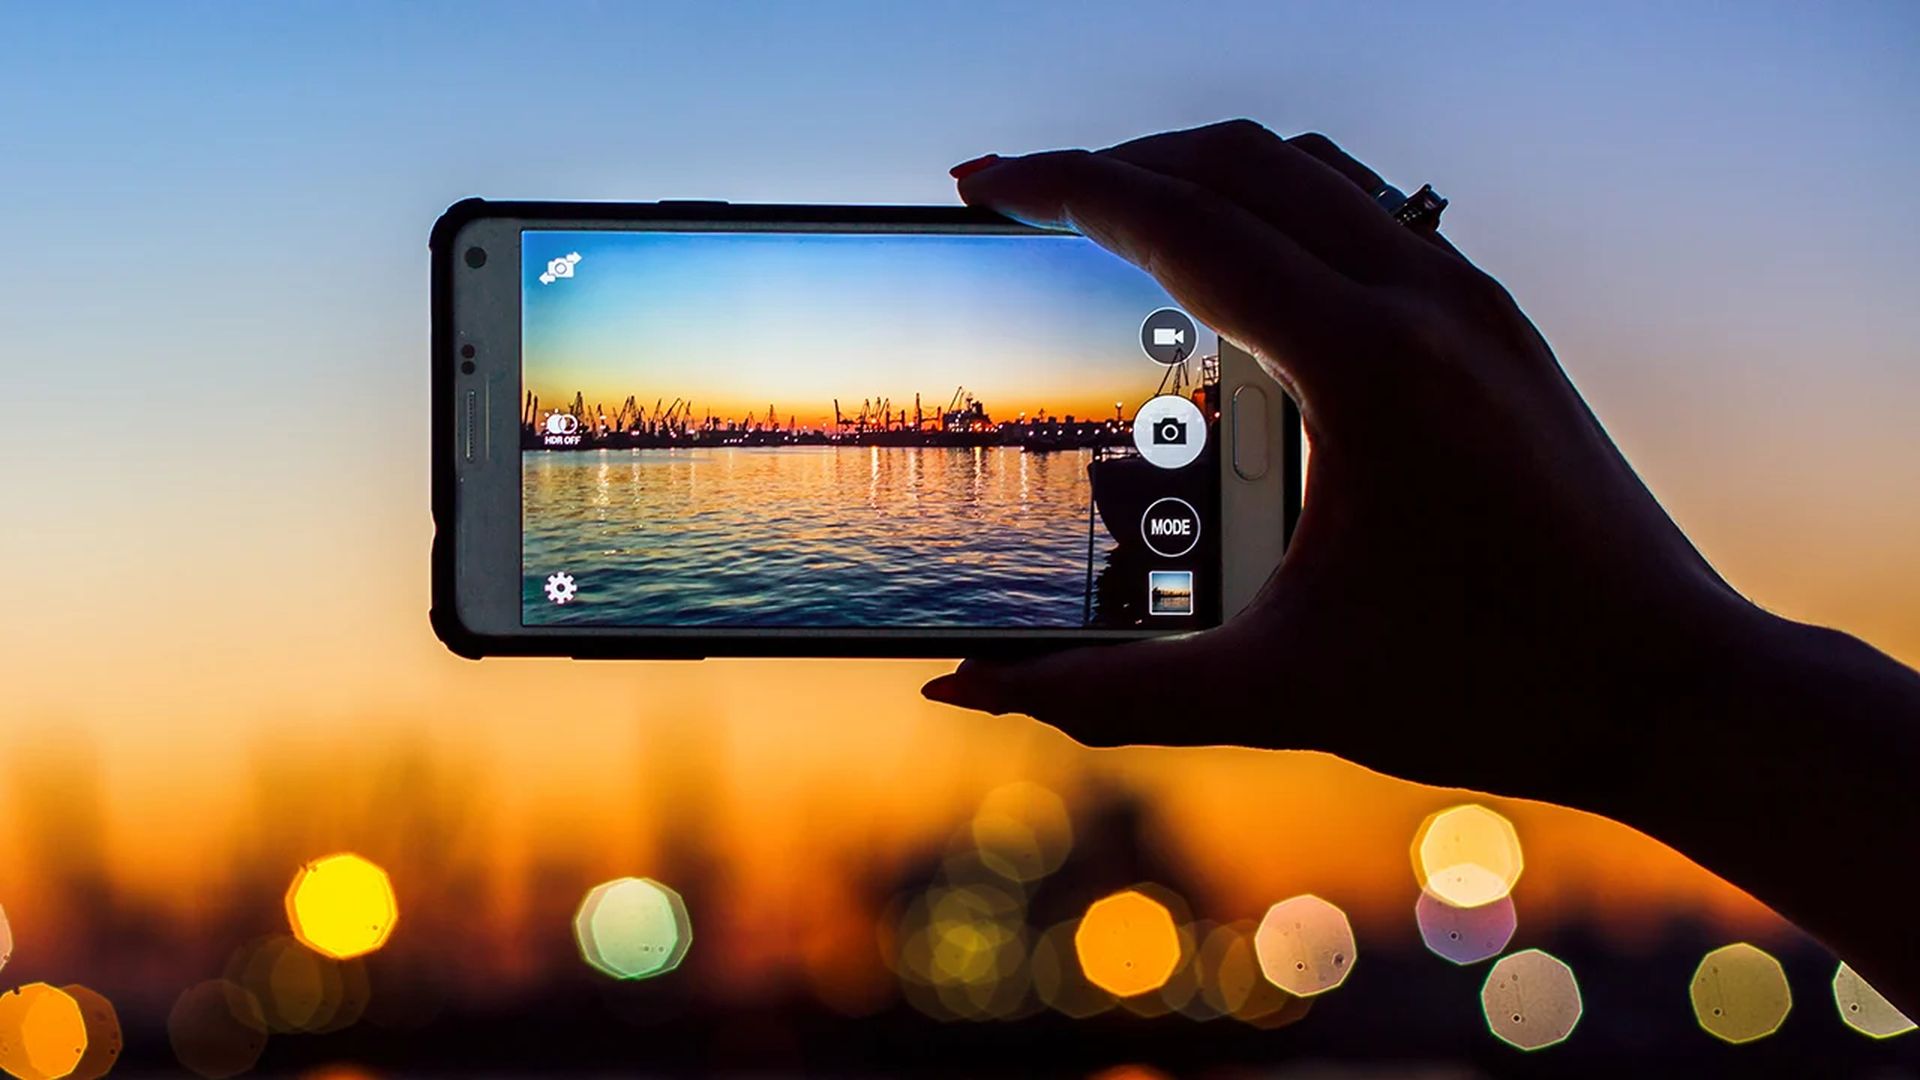 In this article, we are covering 13 photography tips for smartphones in honor of World Photography Day, so you can take the best photos possible.